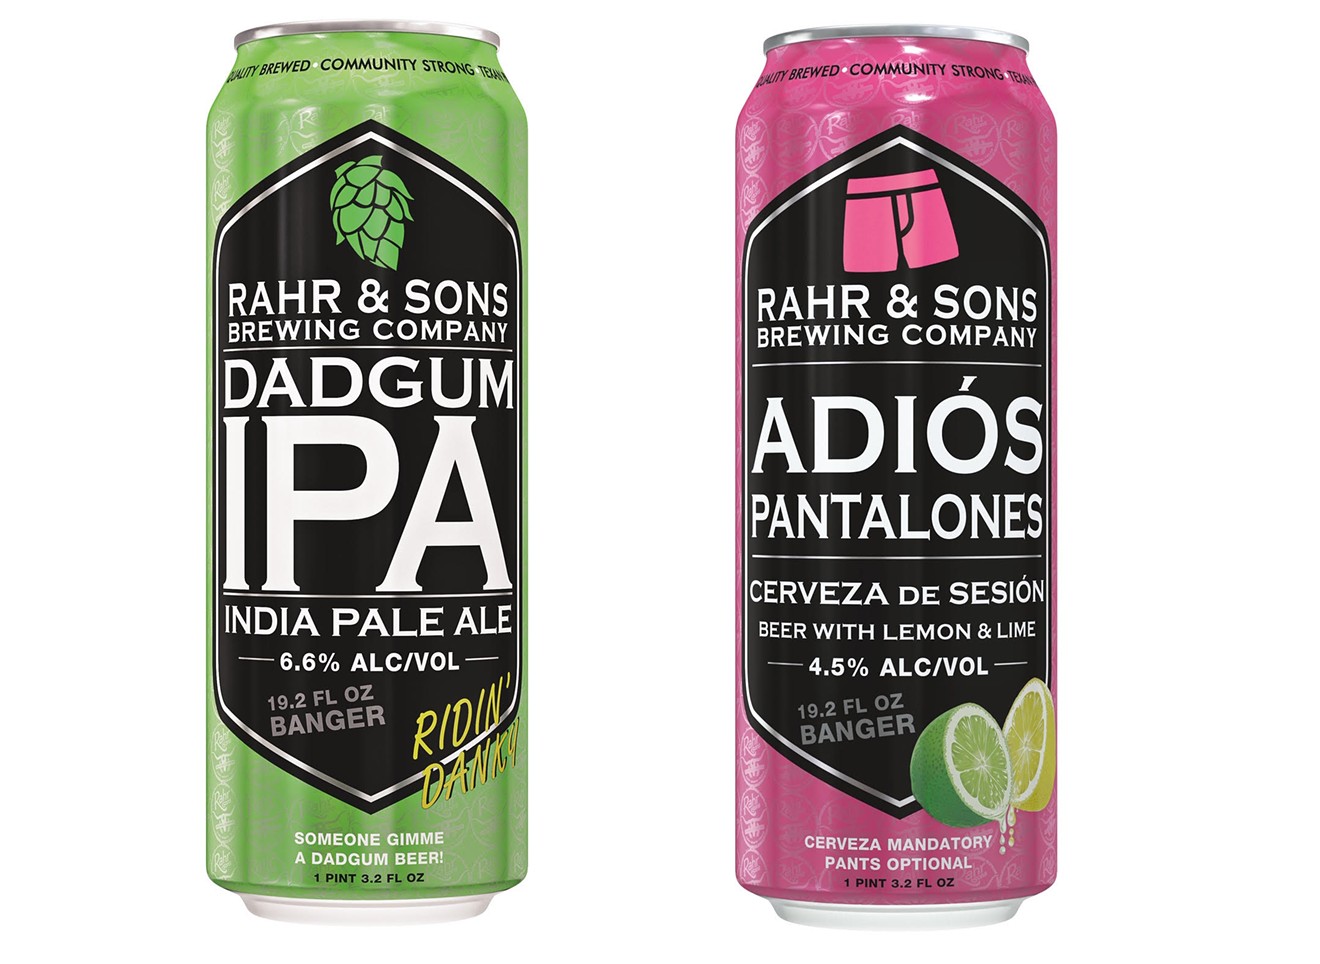 Rahr & Sons recently released two beers available in 19.2 fluid ounce format: the Dadgum IPA and Adios Pantalones cerveza. The move, they say, will help them get into more stadiums and convenience stores.